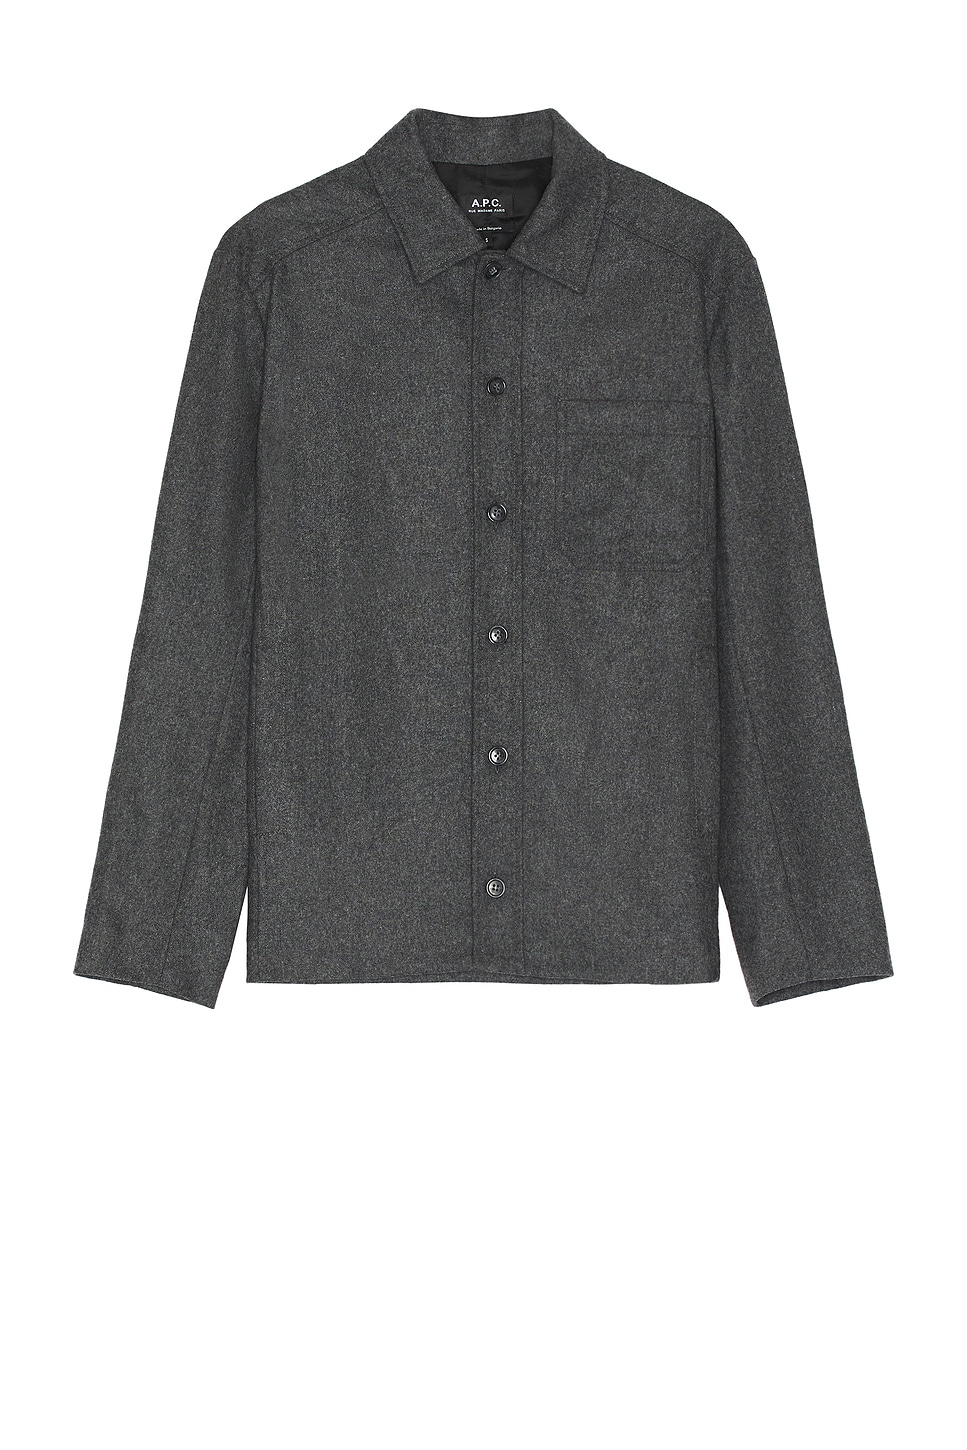 Image 1 of A.P.C. Jasper Jacket in Heathered Anthracite